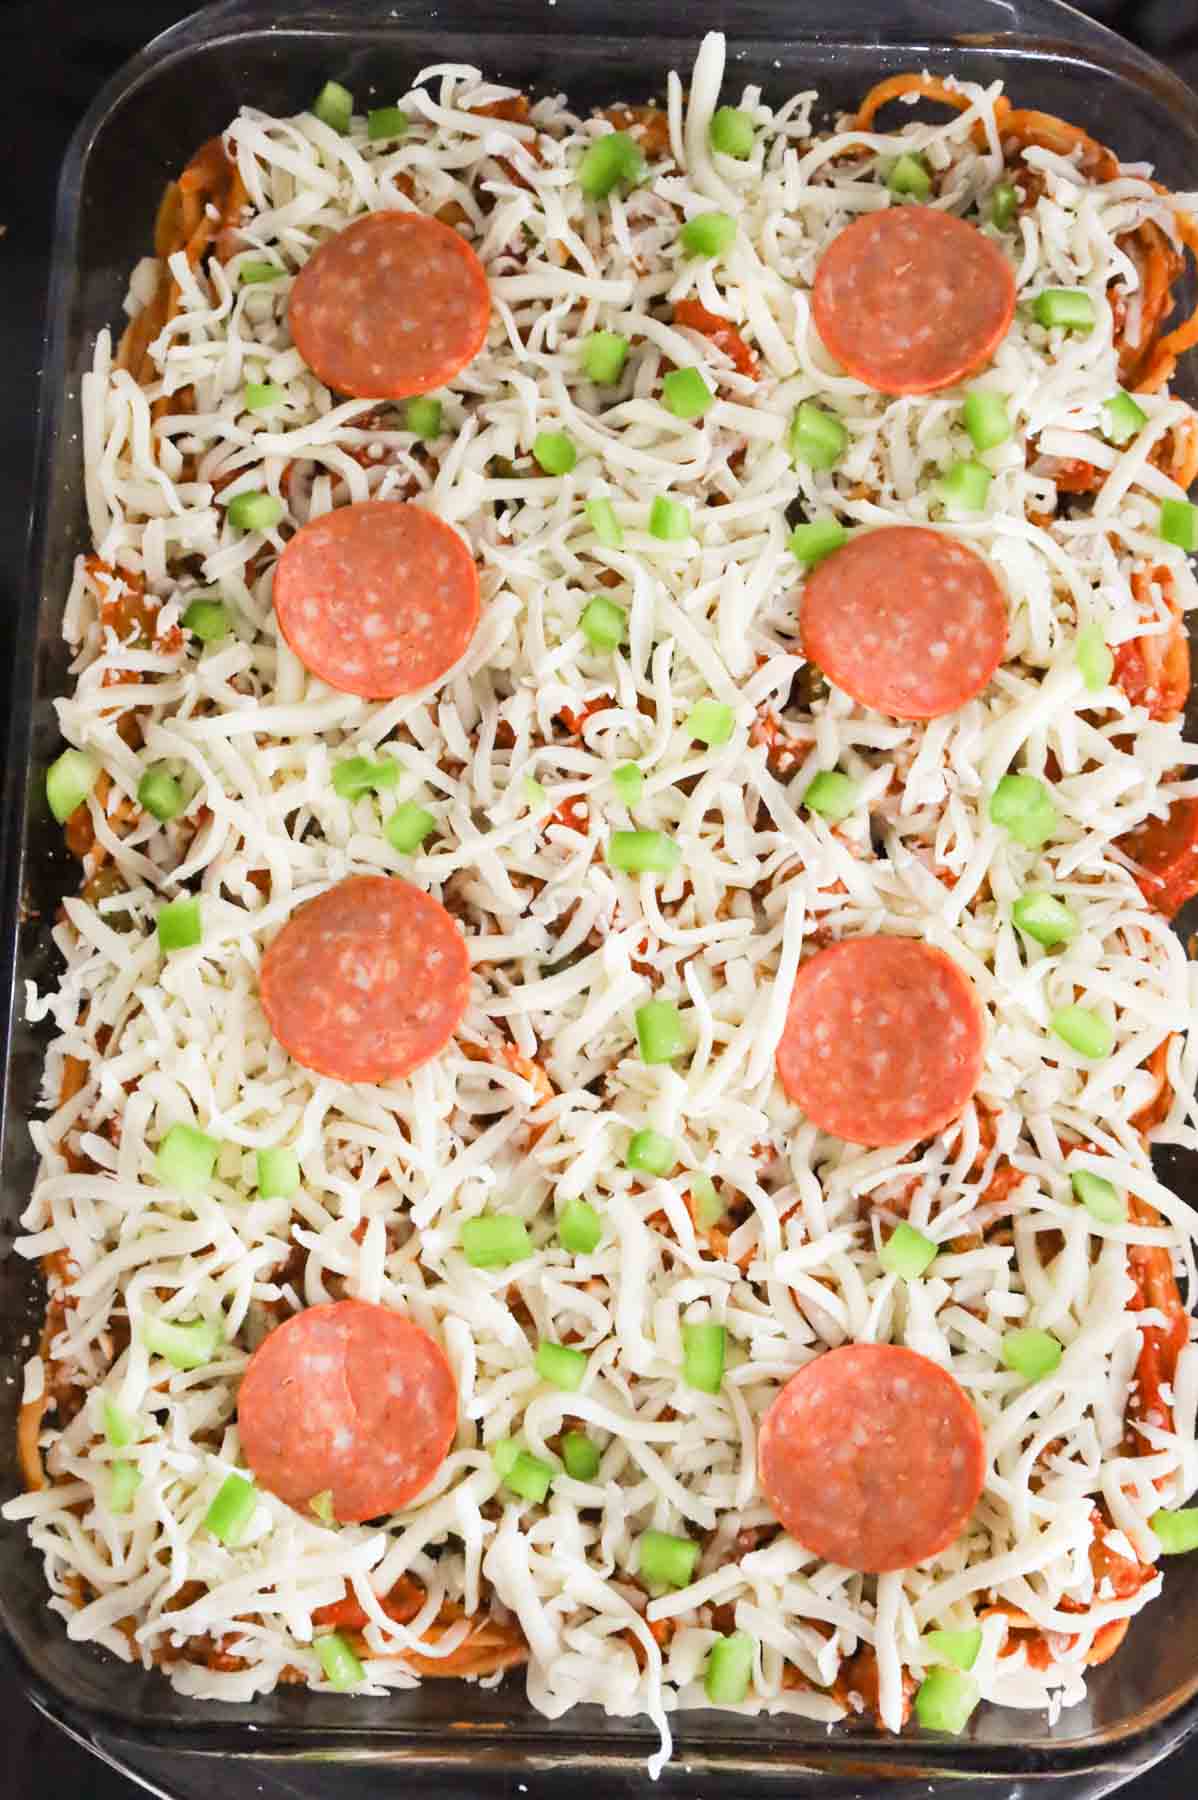 diced green peppers, pepperoni and shredded mozzarella cheese on top of spaghetti in a baking dish